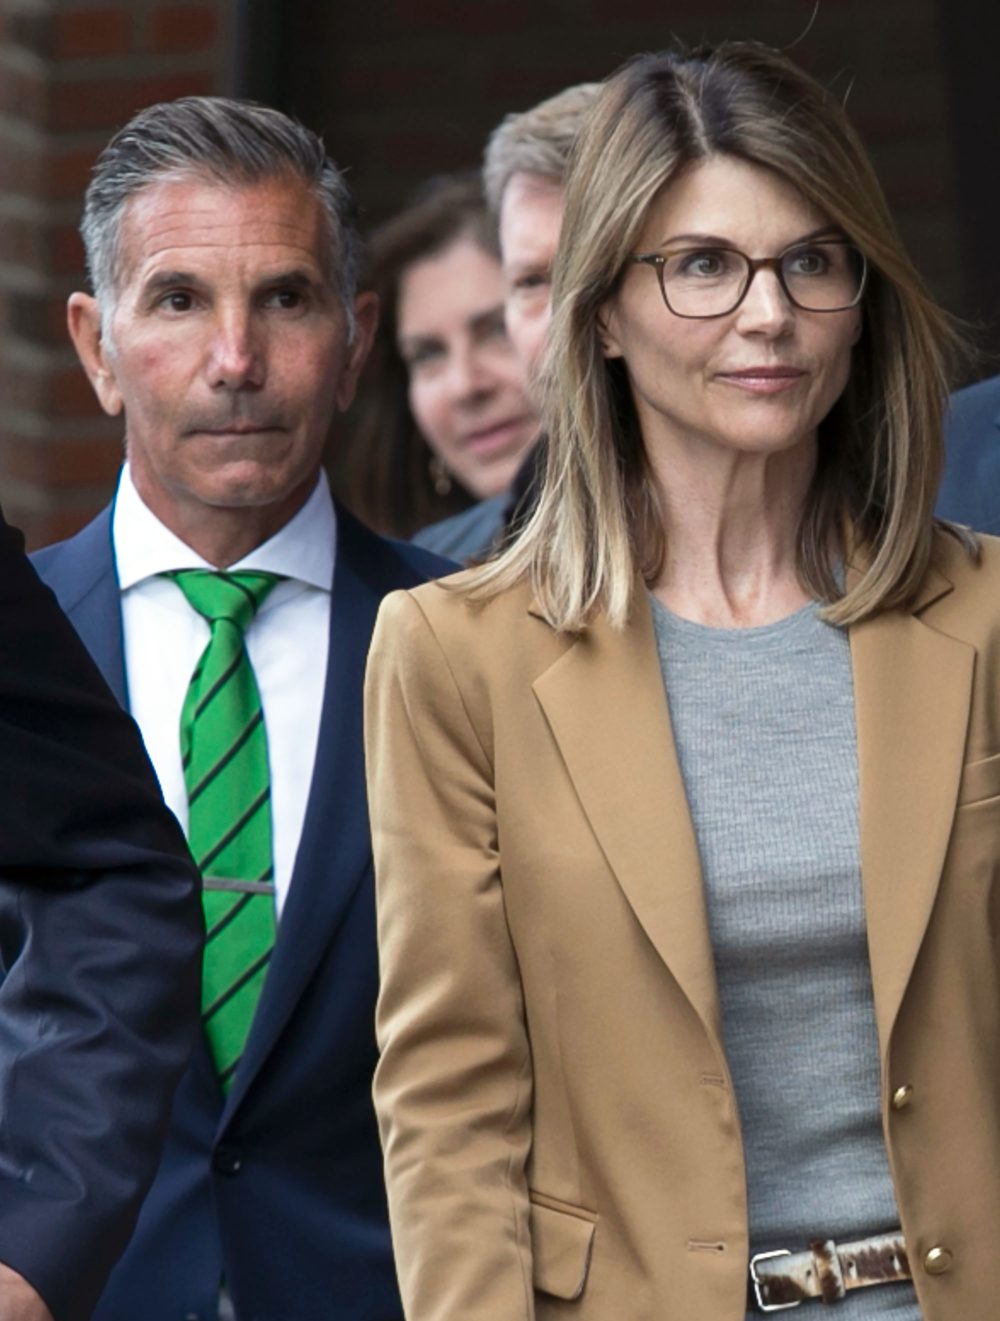 Lori Loughlin and Mossimo Giannulli Ask Judge to Reduce $1 Million Bonds in College Admissions Case